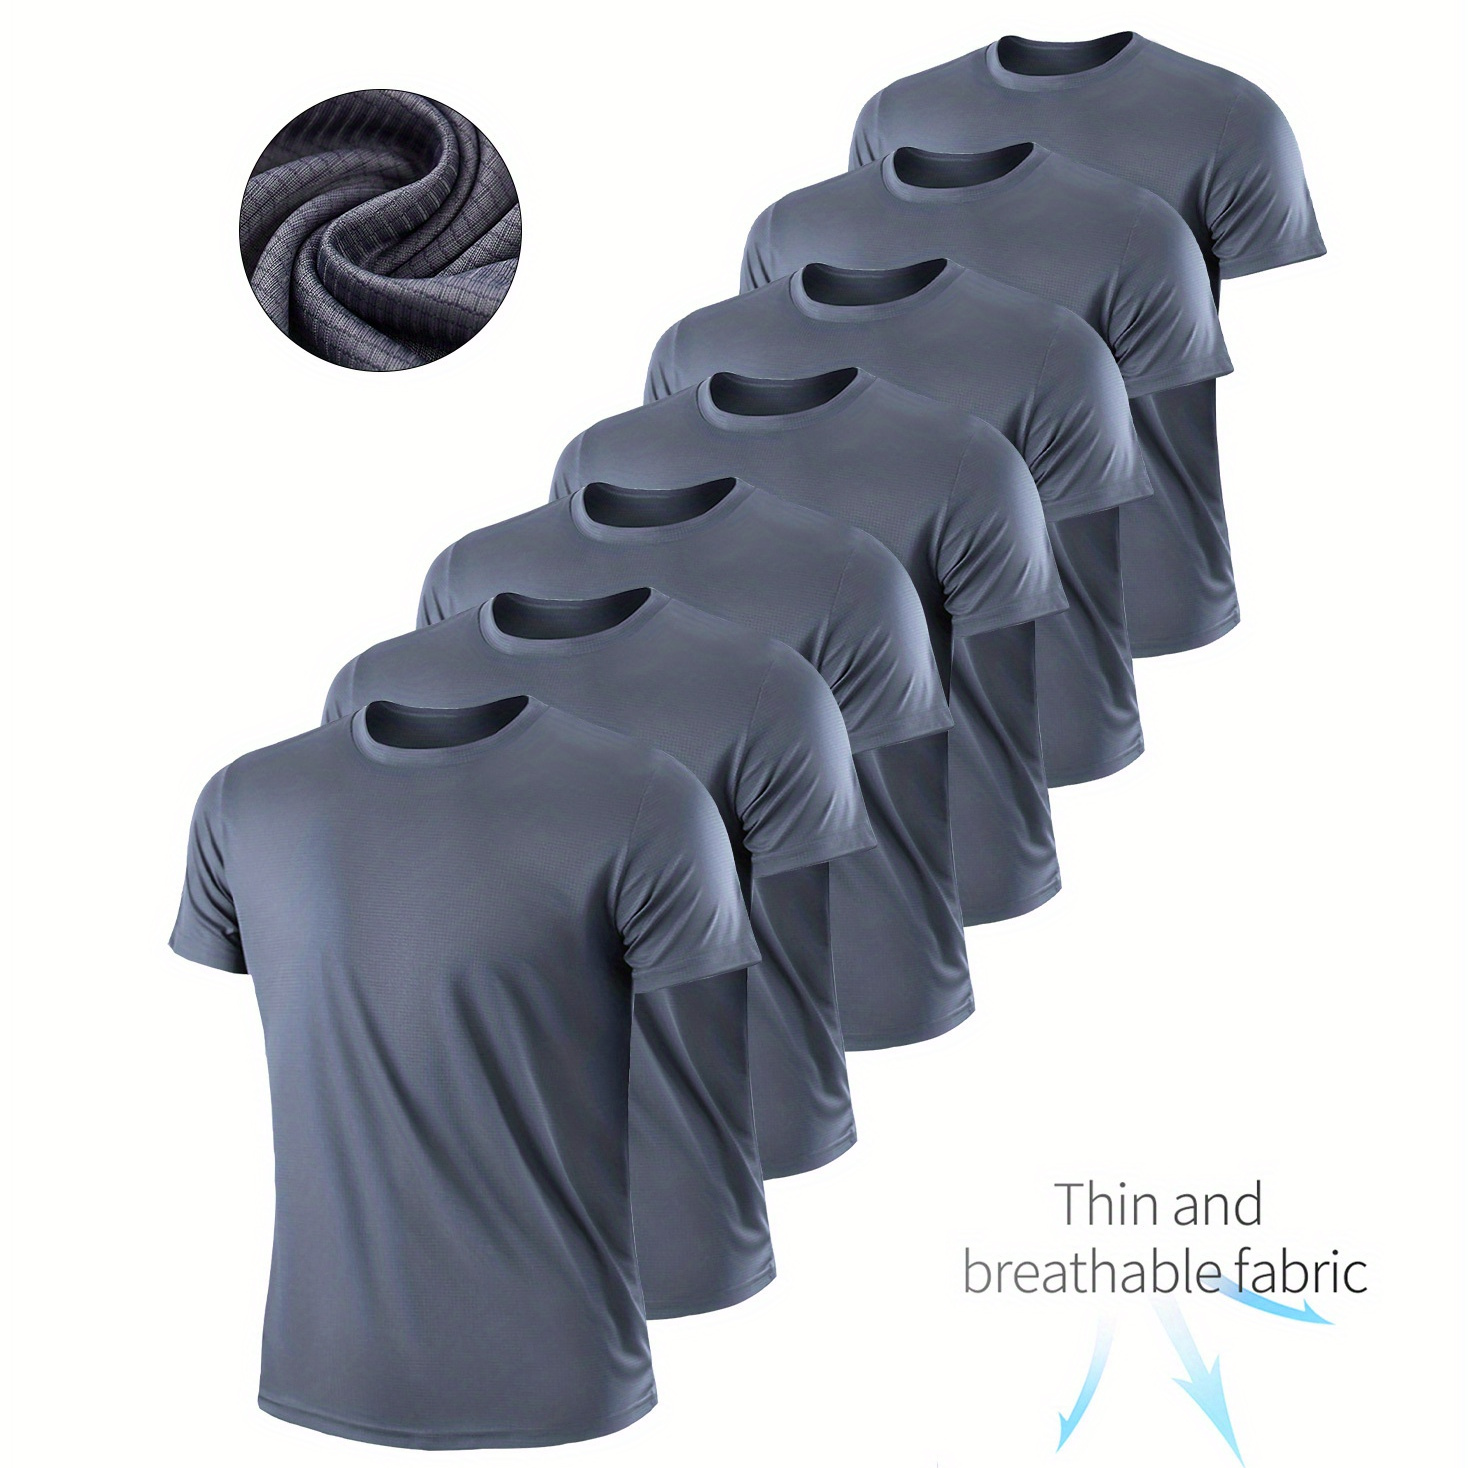 

7pcs Men's Solid Slightly Stretch Quick-drying Breathable Short Sleeve Round Neck Comfy T-shirt For Gym Fitness Training